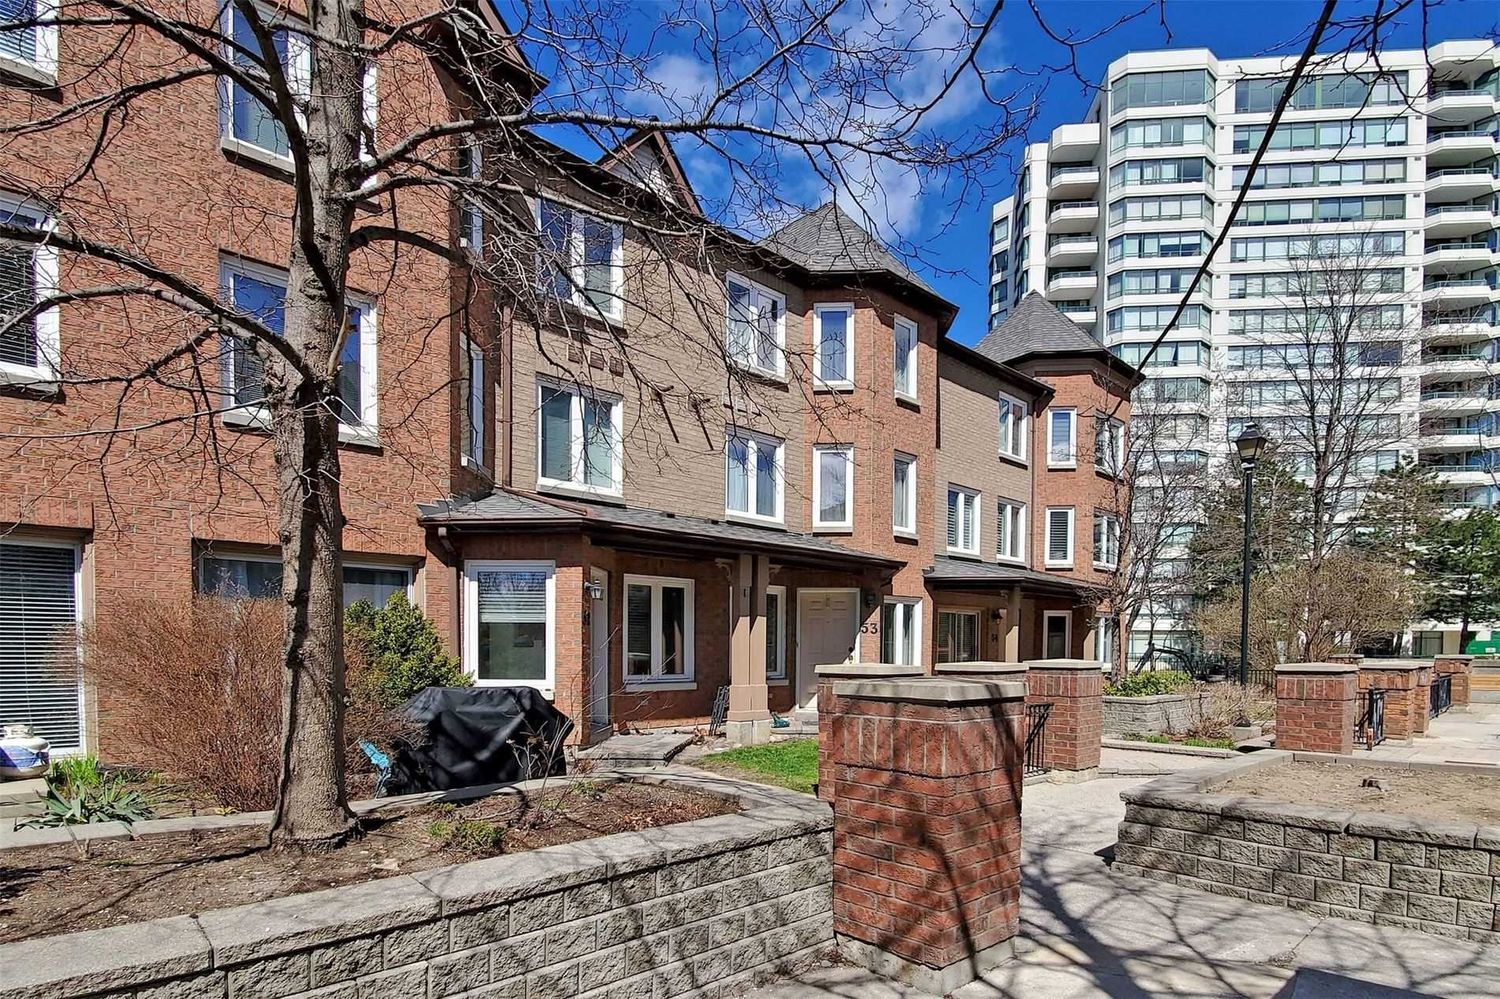 735 New Westminster Drive. 735 New Westminster Dr Townhomes is located in  Vaughan, Toronto - image #2 of 3